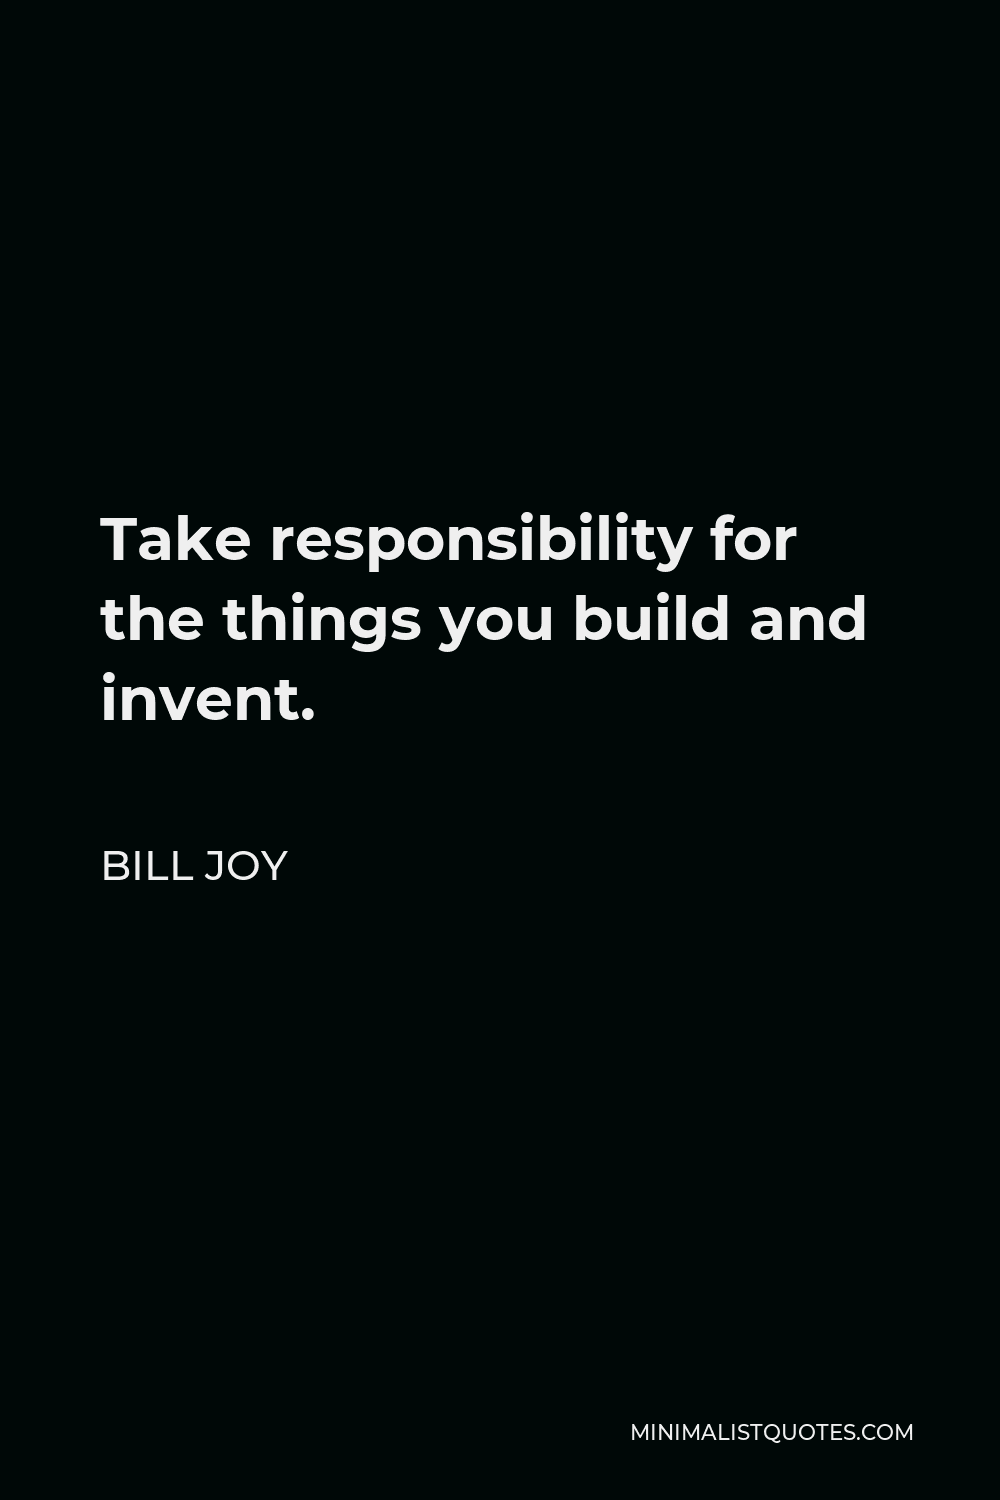 Bill Joy Quote - Take responsibility for the things you build and invent.